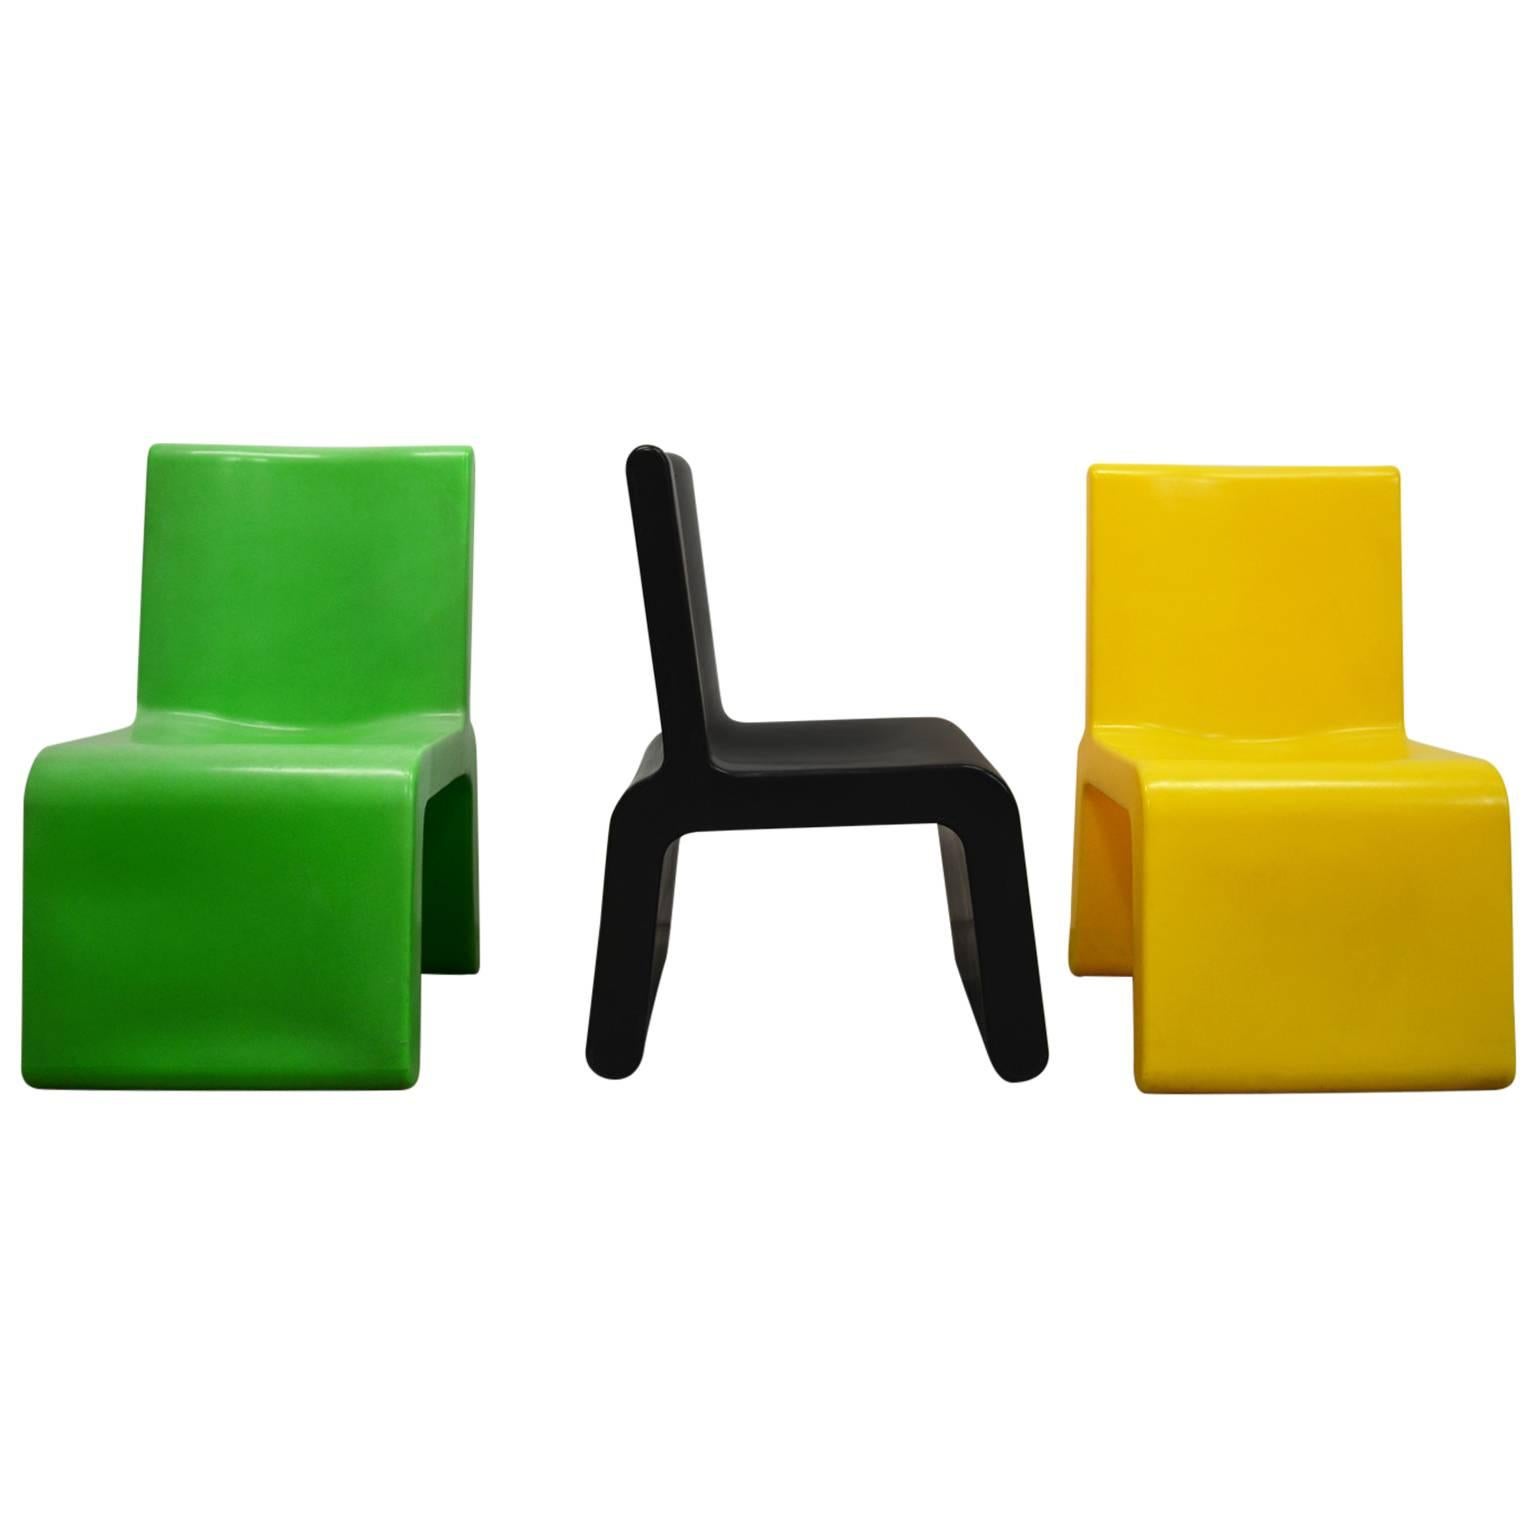 Colorful Modern WL&T Chairs by Marc Newson for Walter Van Beirendonck Fashion